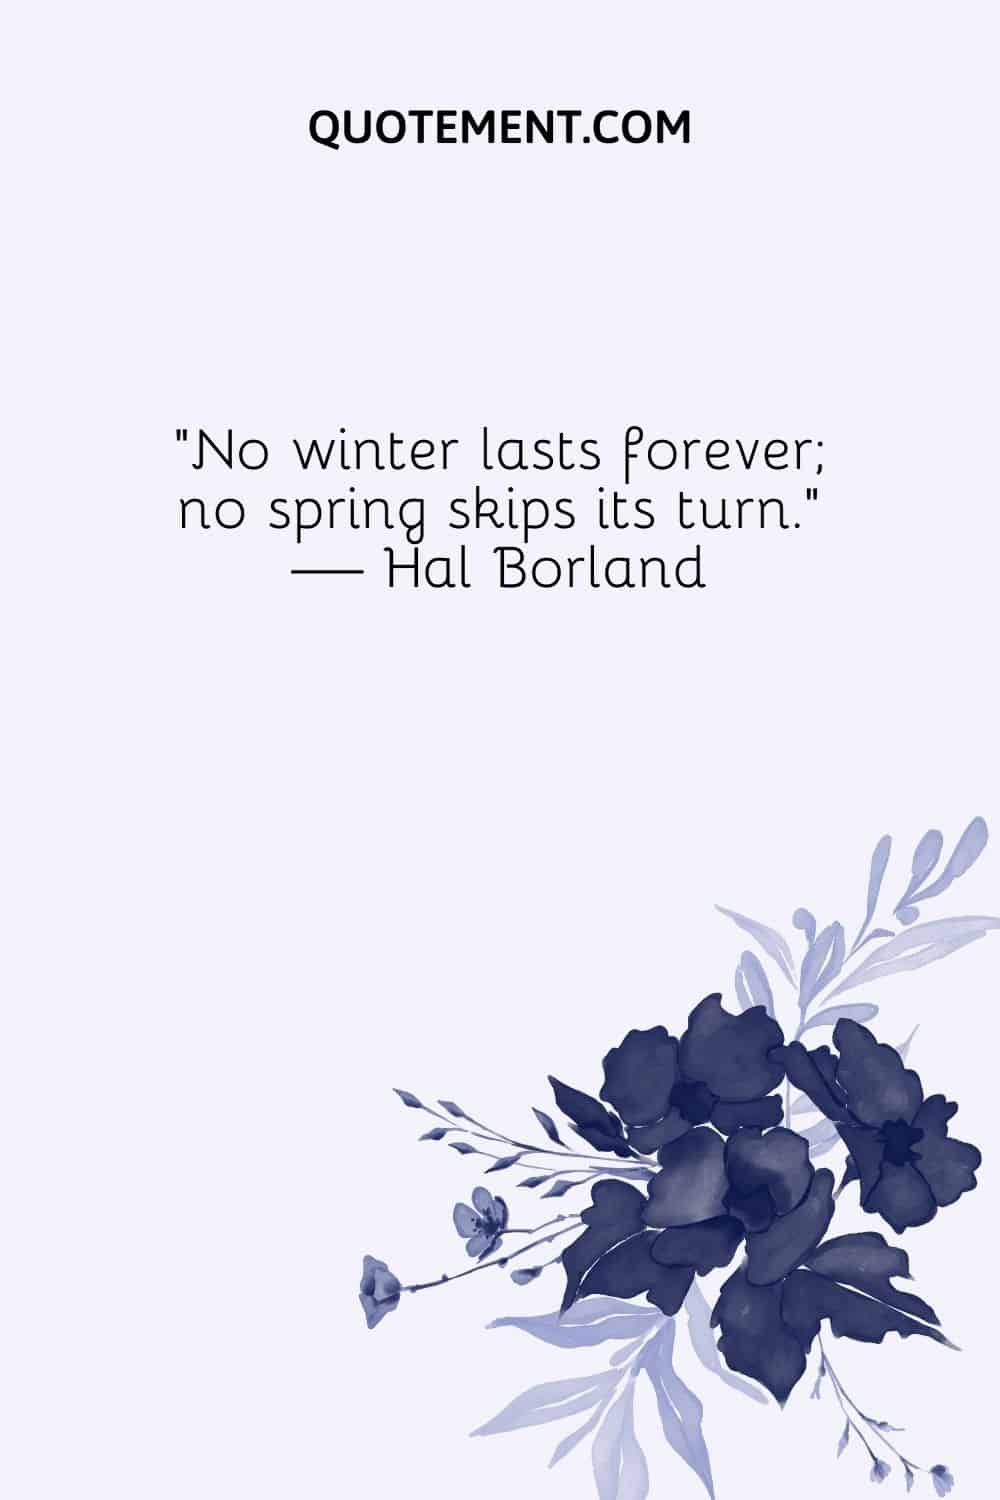 No winter lasts forever; no spring skips its turn